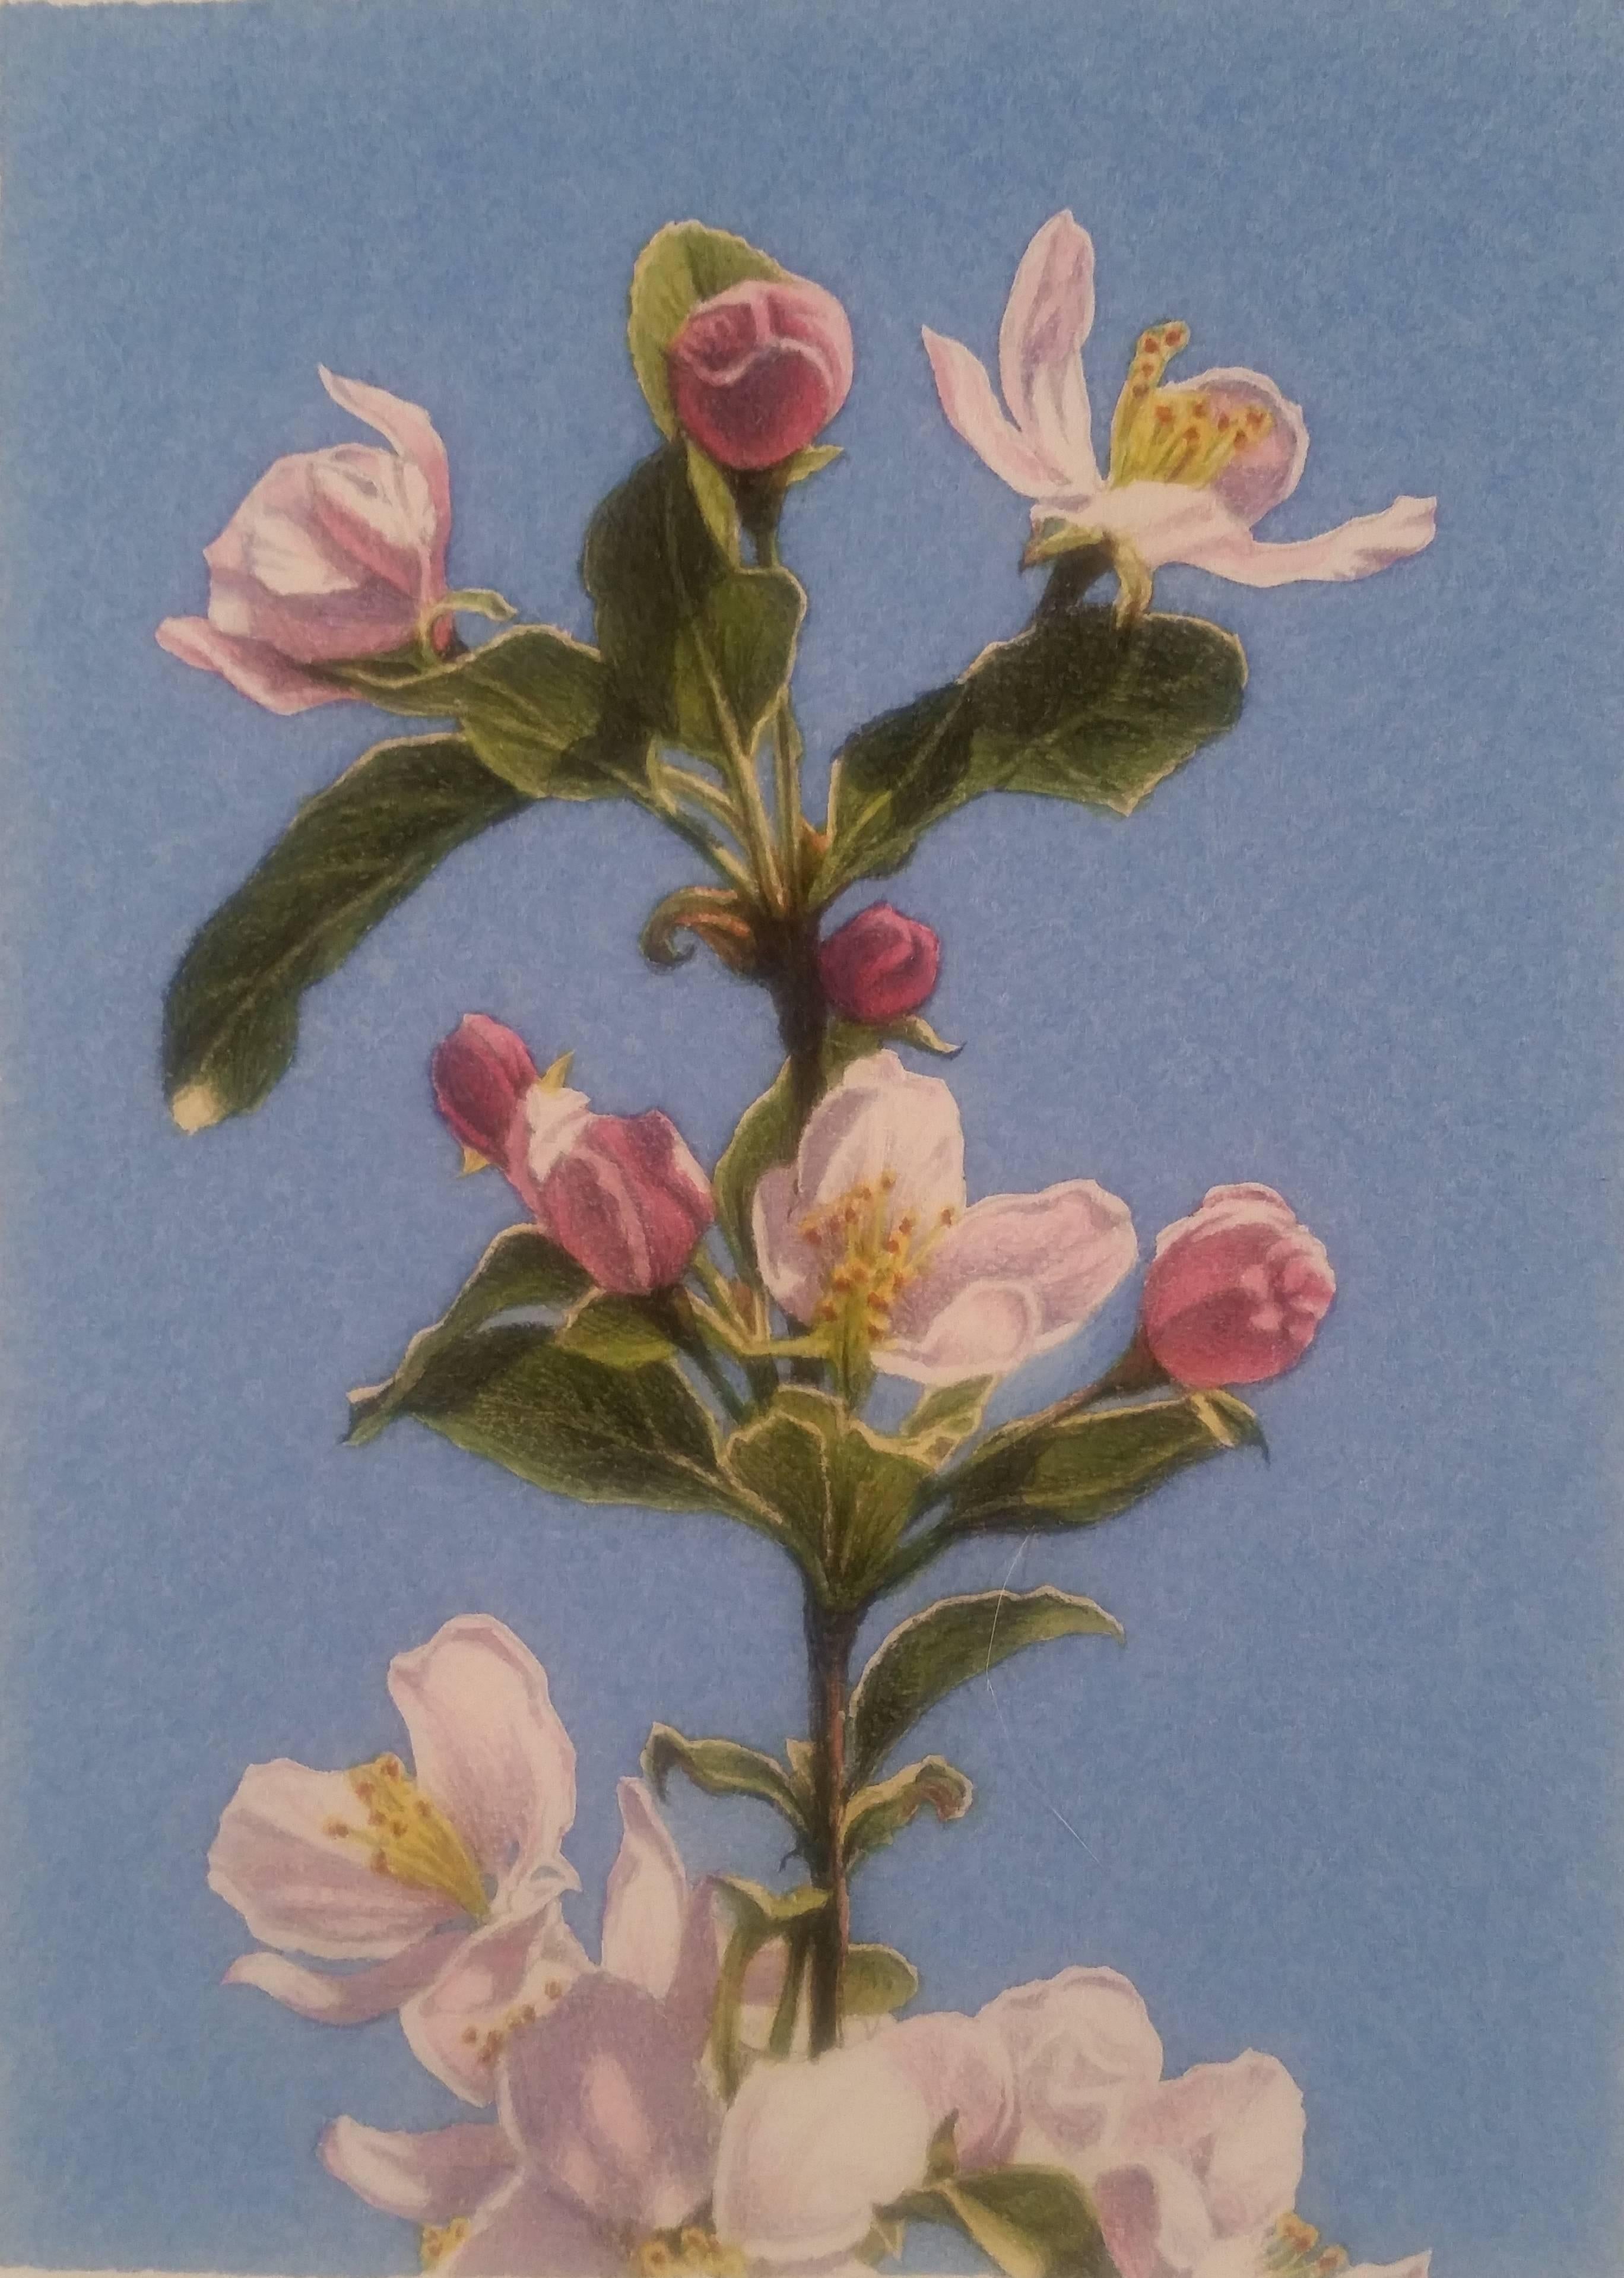 In his realist watercolor on paper still-life, Higan Cherry, Frederick Brosen renders the tender pink blooms in minute detail. The result of careful observation, Brosen achieves clarity in his representation without losing its softness and delicacy.